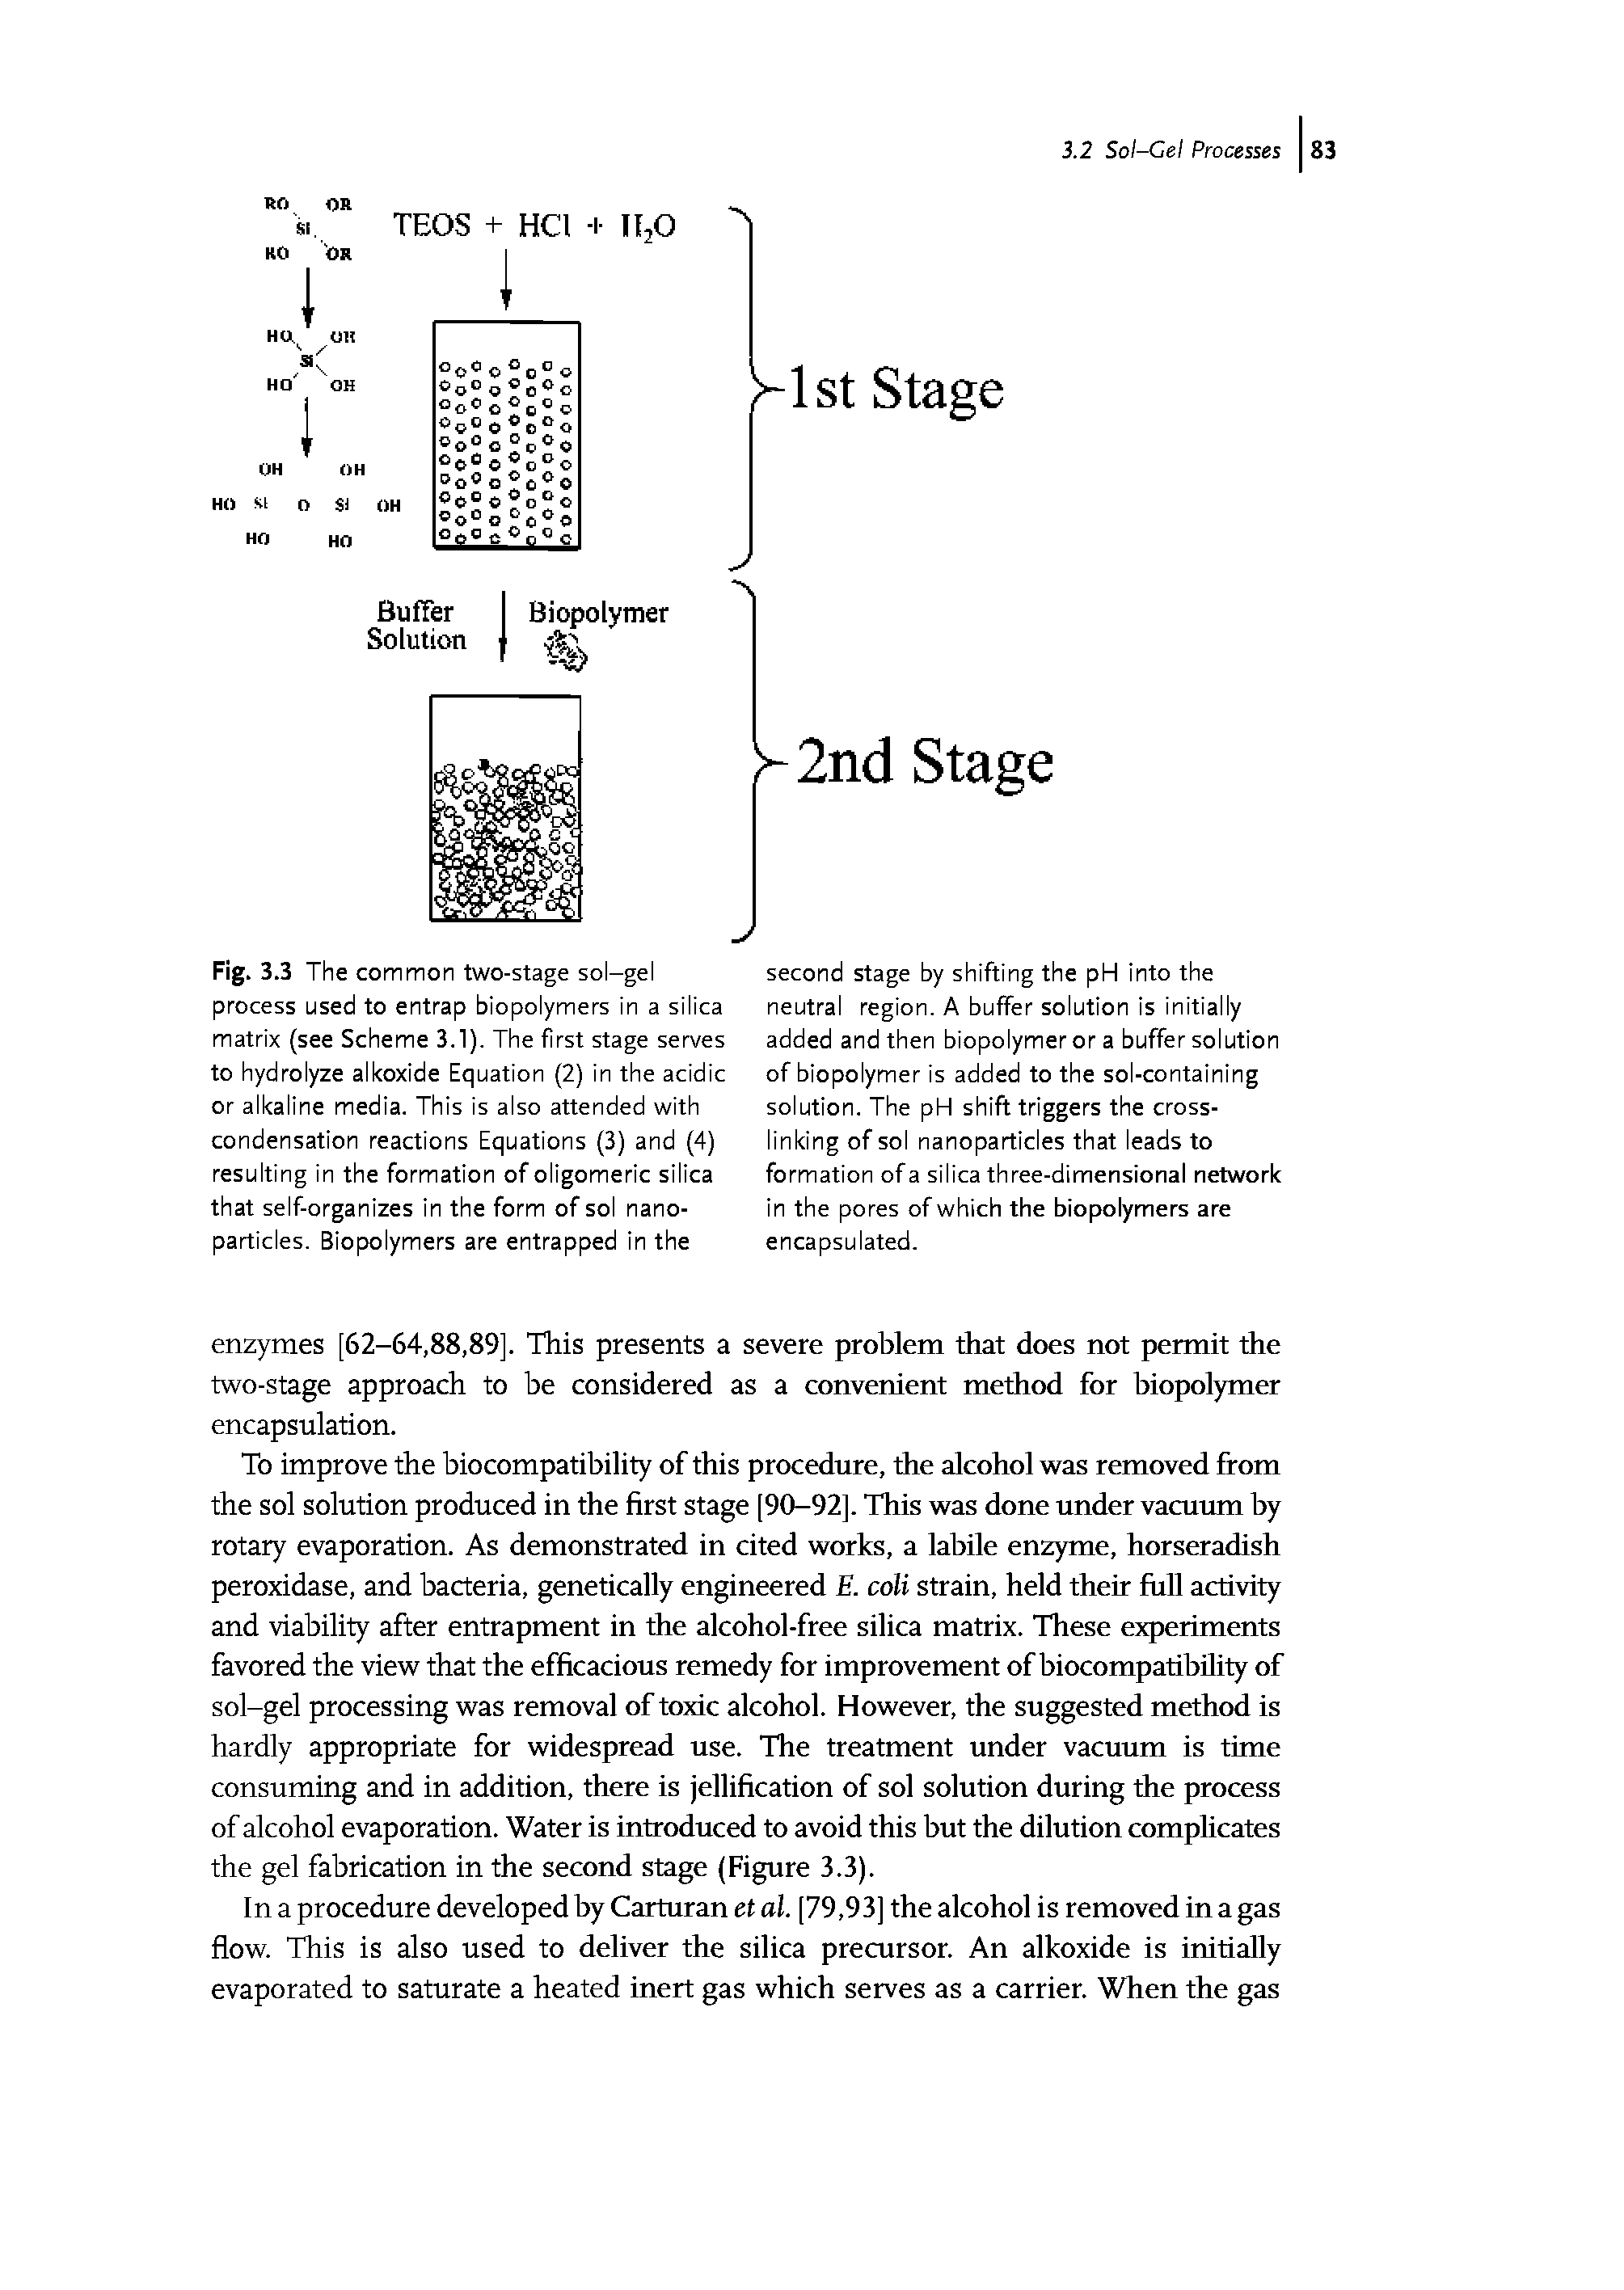 Fig. 3.3 The common two-stage sol-gel process used to entrap biopolymers in a silica matrix (see Scheme 3.1). The first stage serves to hydrolyze alkoxide Equation (2) in the acidic or alkaline media. This is also attended with condensation reactions Equations (3) and (4) resulting in the formation of oligomeric silica that self-organizes in the form of sol nanoparticles. Biopolymers are entrapped in the...